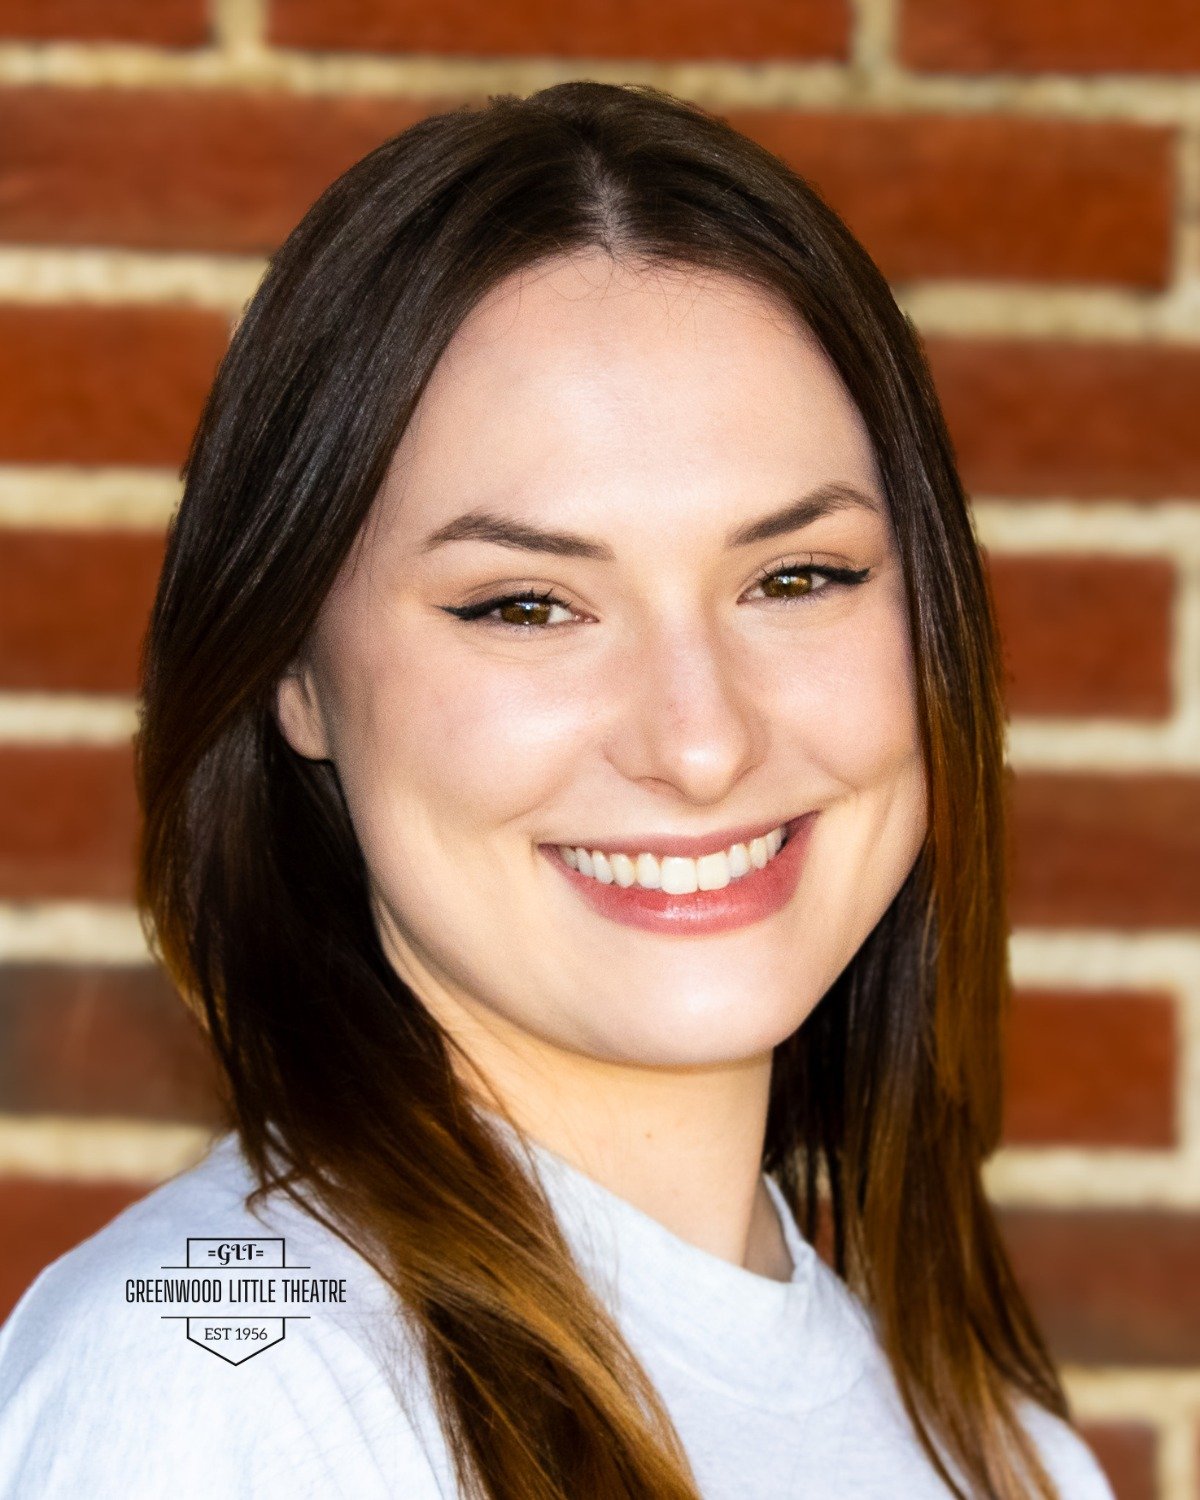 🎭 Introducing Madison Gray Haley as Sunny Freitag! 🎭

Madison Gray Haley, from Kosciusko, MS, makes her theatre debut at the Greenwood Little Theatre in the role of Sunny Freitag in &quot;The Last Night of Ballyhoo,&quot; sponsored by Kirk Auto Gro